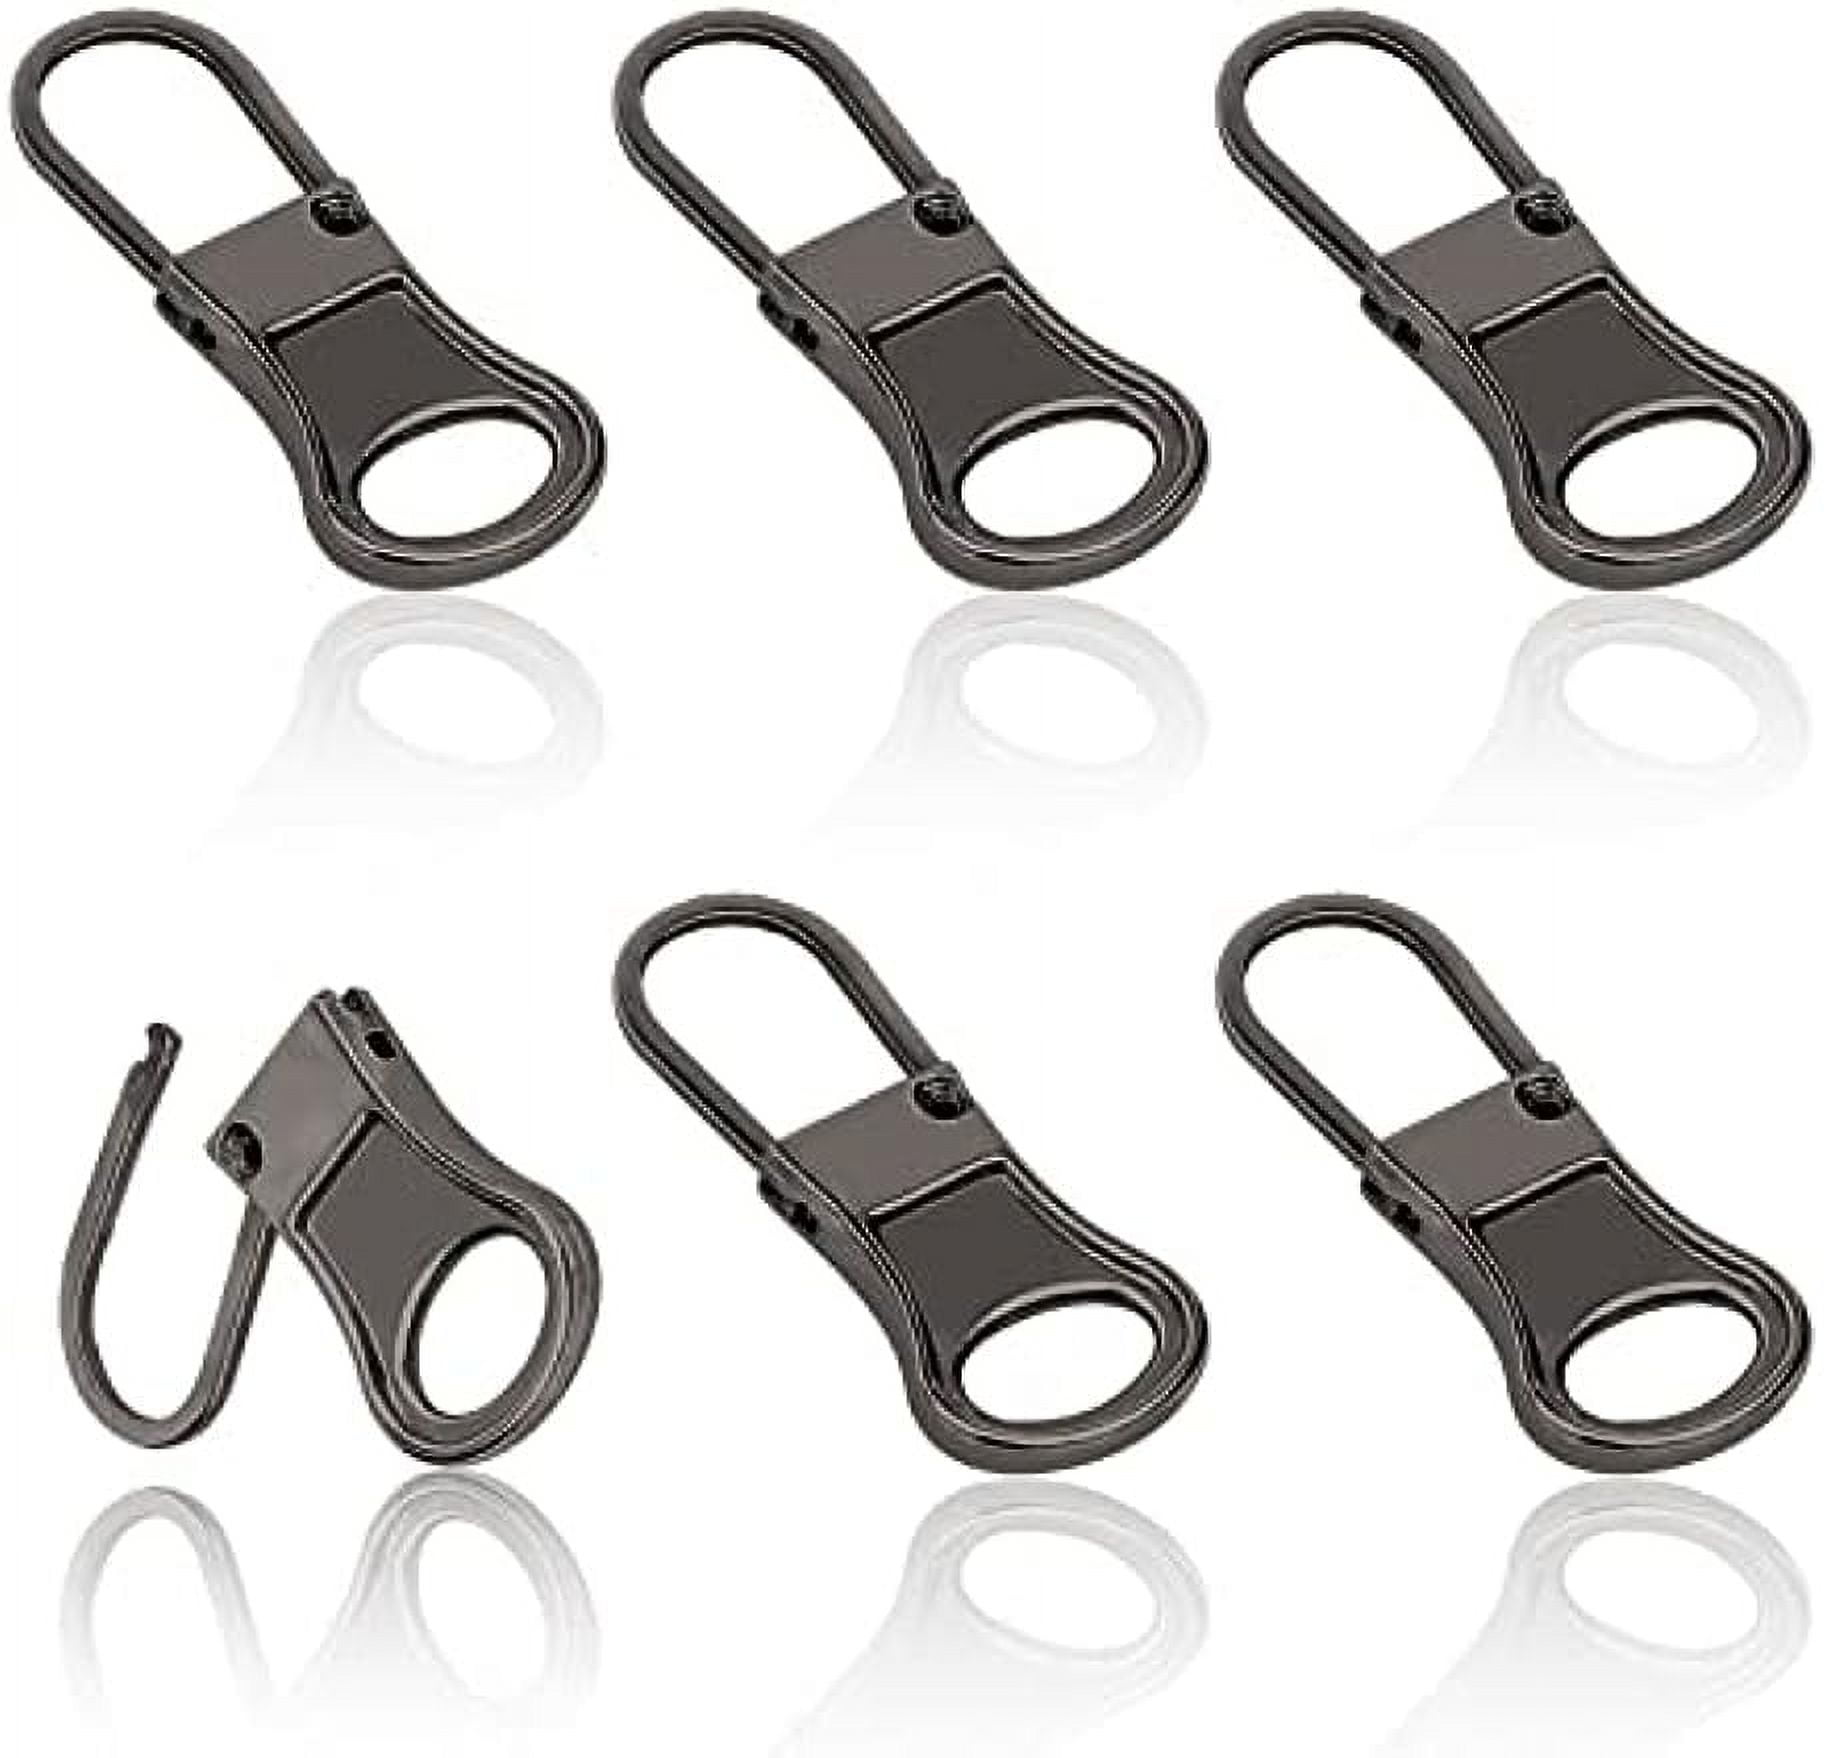 16PCS Zipper Fixer Repair Pull Tap Replacement For Luggage Boots